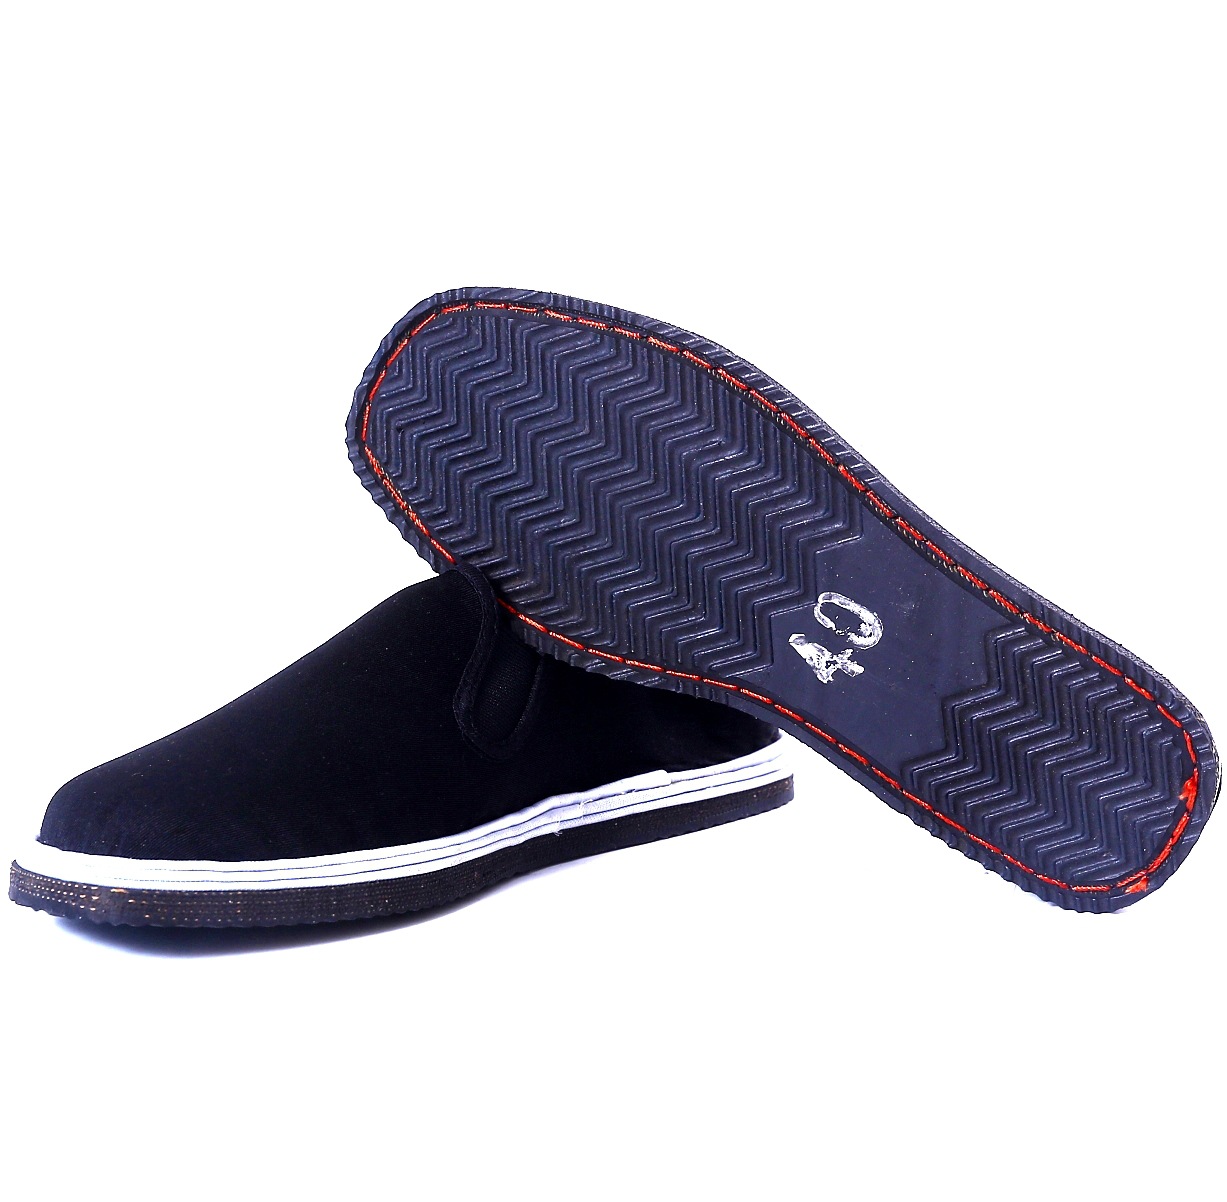 Car Resin Sole Cloth Shoes Comfortable Wear-Resistant Old Beijing Cloth Shoes Strong Cloth Soles Canvas Two Cotton Single Layer Shoes